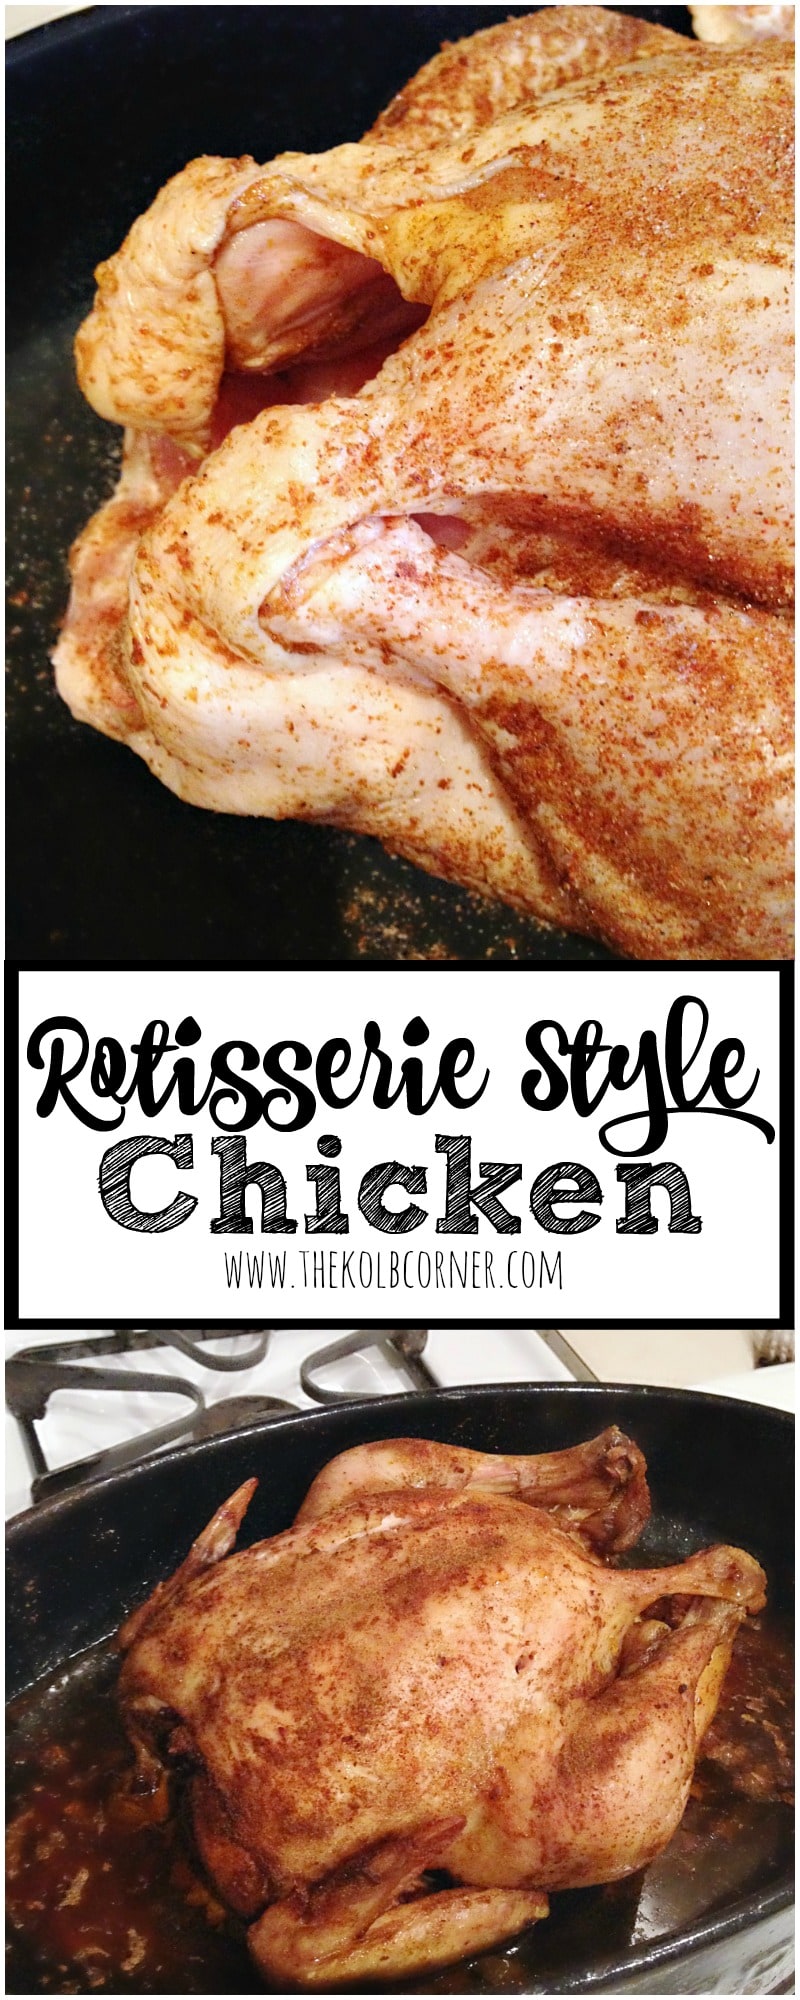 You can get all the flavor of Rotisserie Chicken without the hassle! Try this slow roasted rotisserie style chicken for your next family dinner.